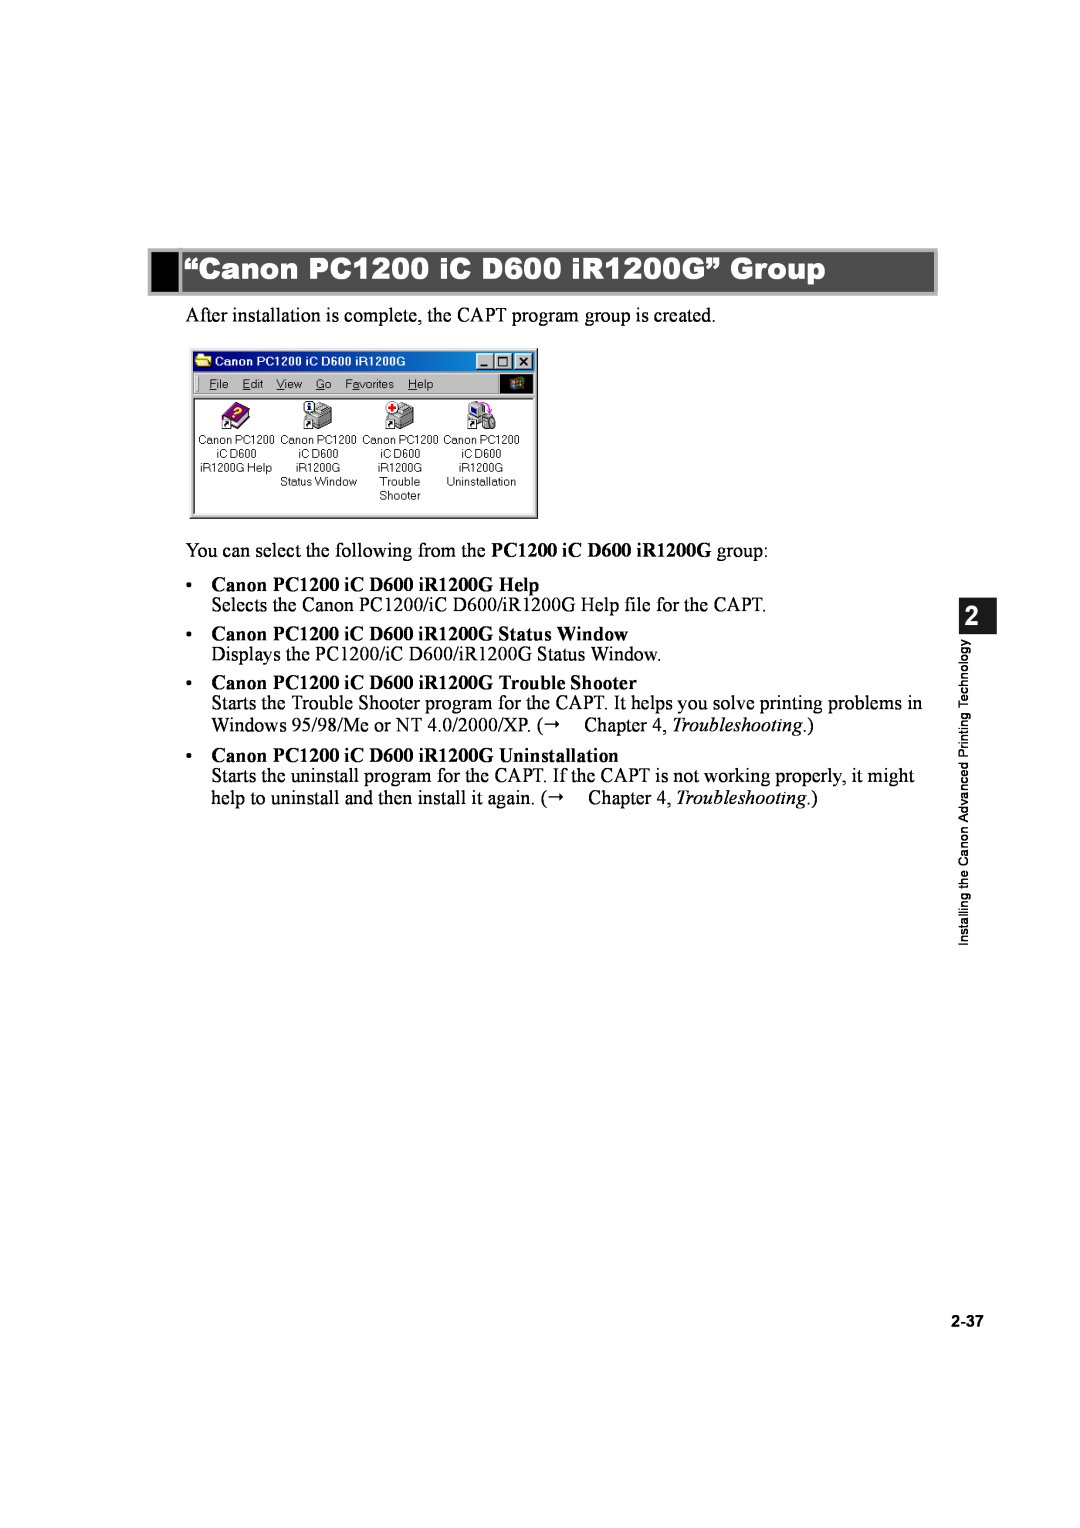 Canon manual “Canon PC1200 iC D600 iR1200G” Group, Canon PC1200 iC D600 iR1200G Help 